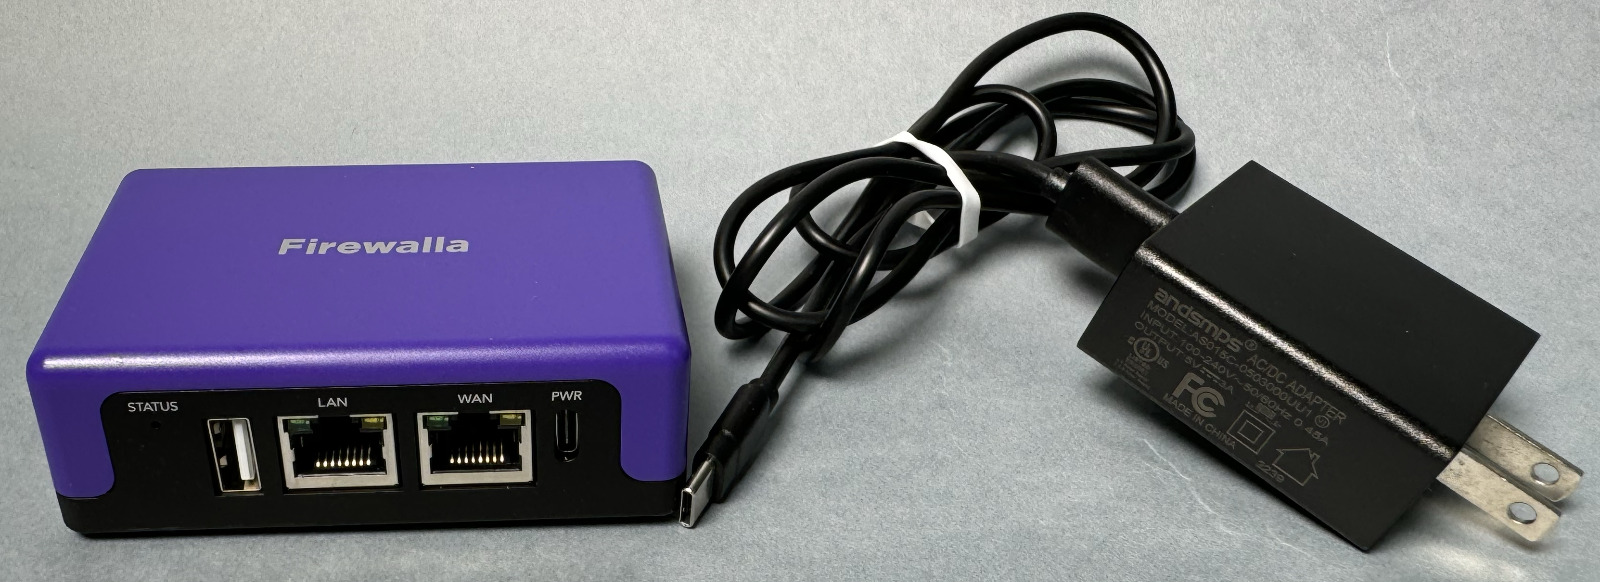 Firewalla Purple (not SE) - Cyber Security Firewall and Router for Home&Business